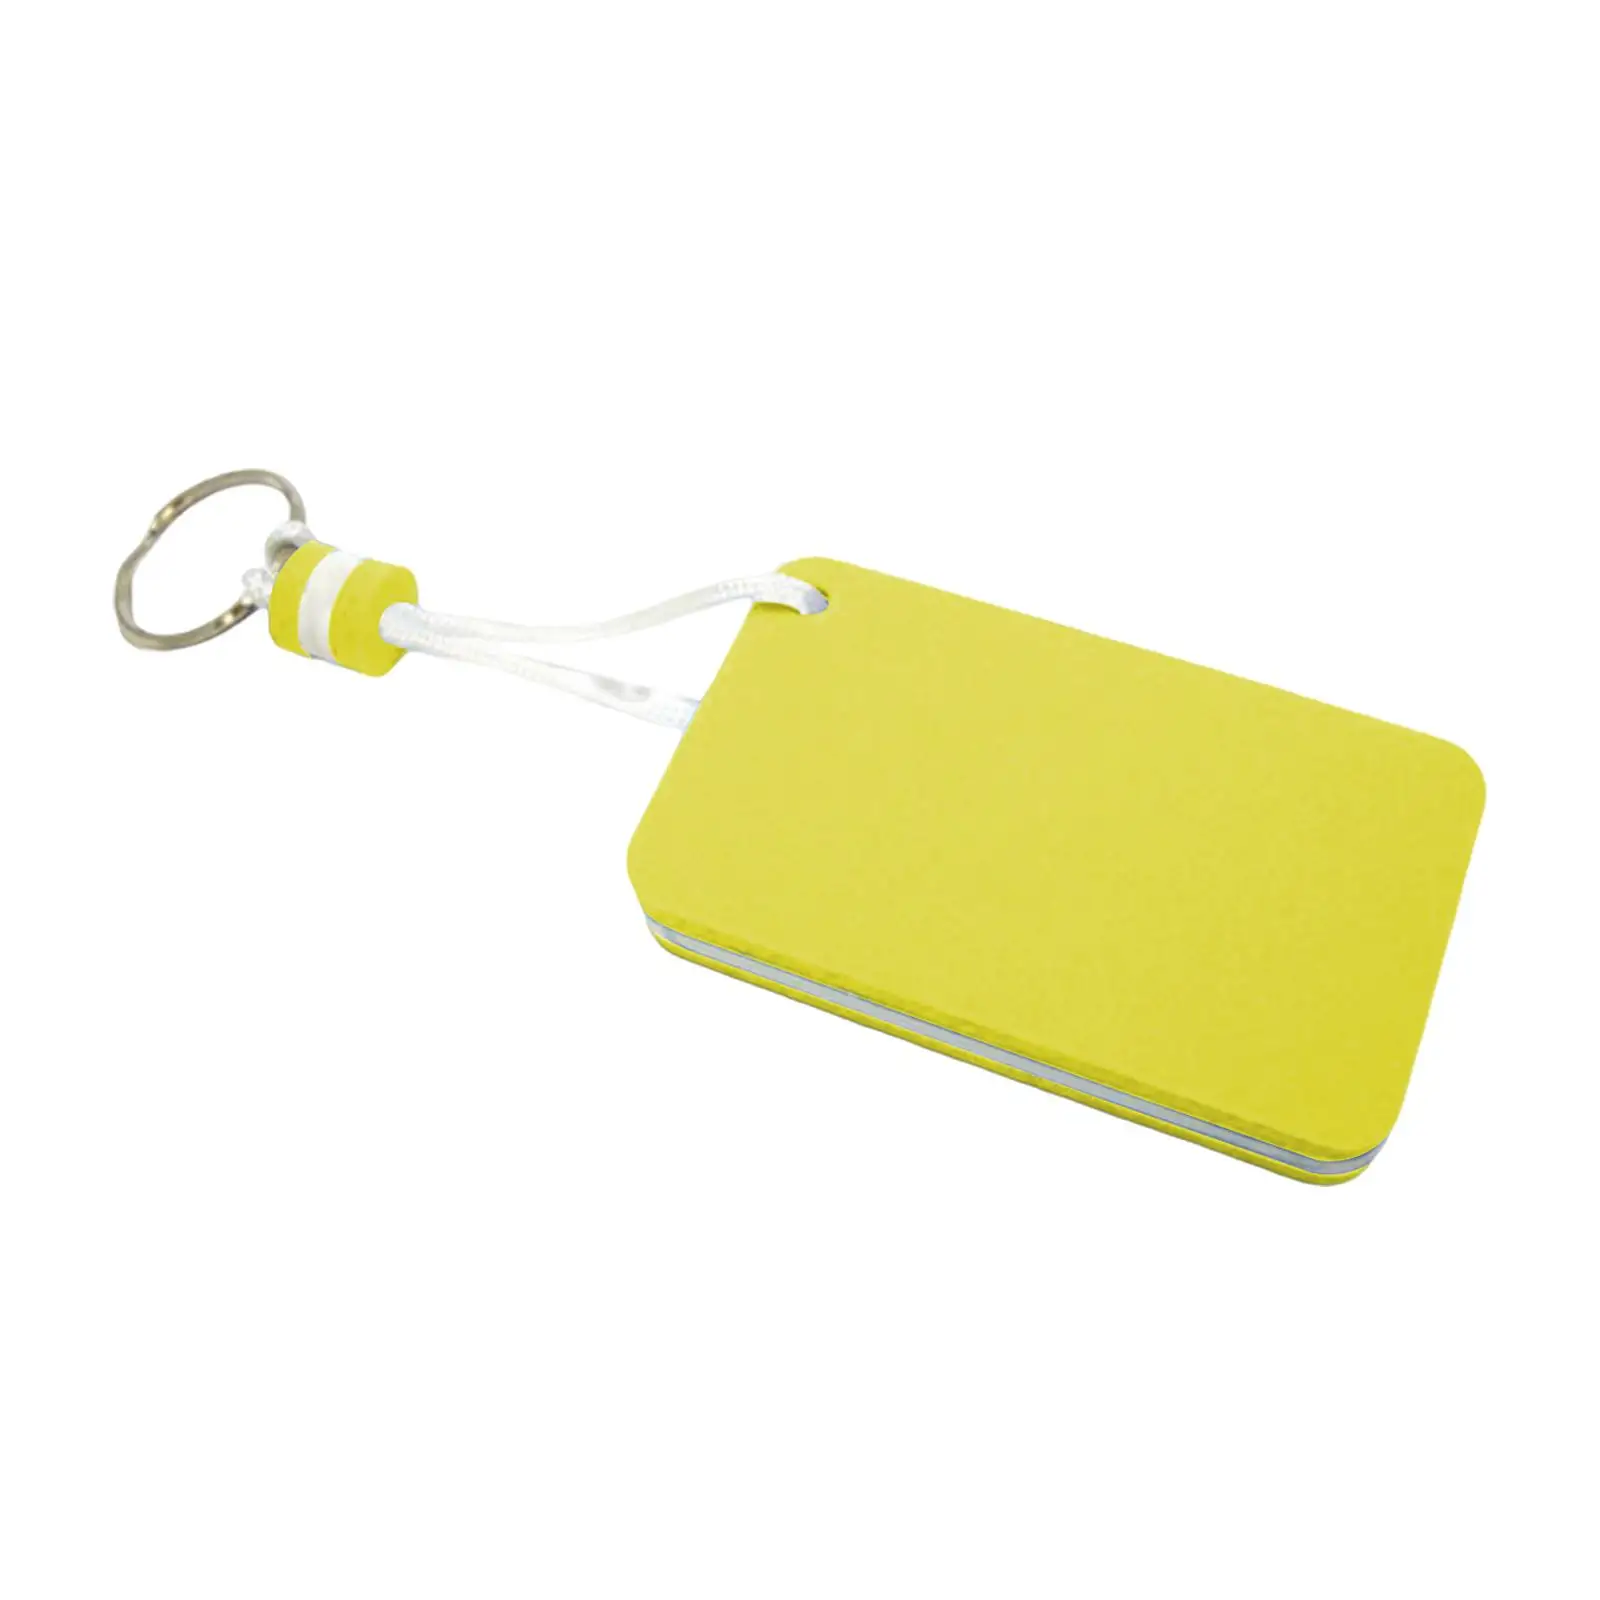 Floating Keychain Floatable Lightweight Floater Rectangle Key Chain Keyring for Kayaking Water Sports Boating Surfing Fishing